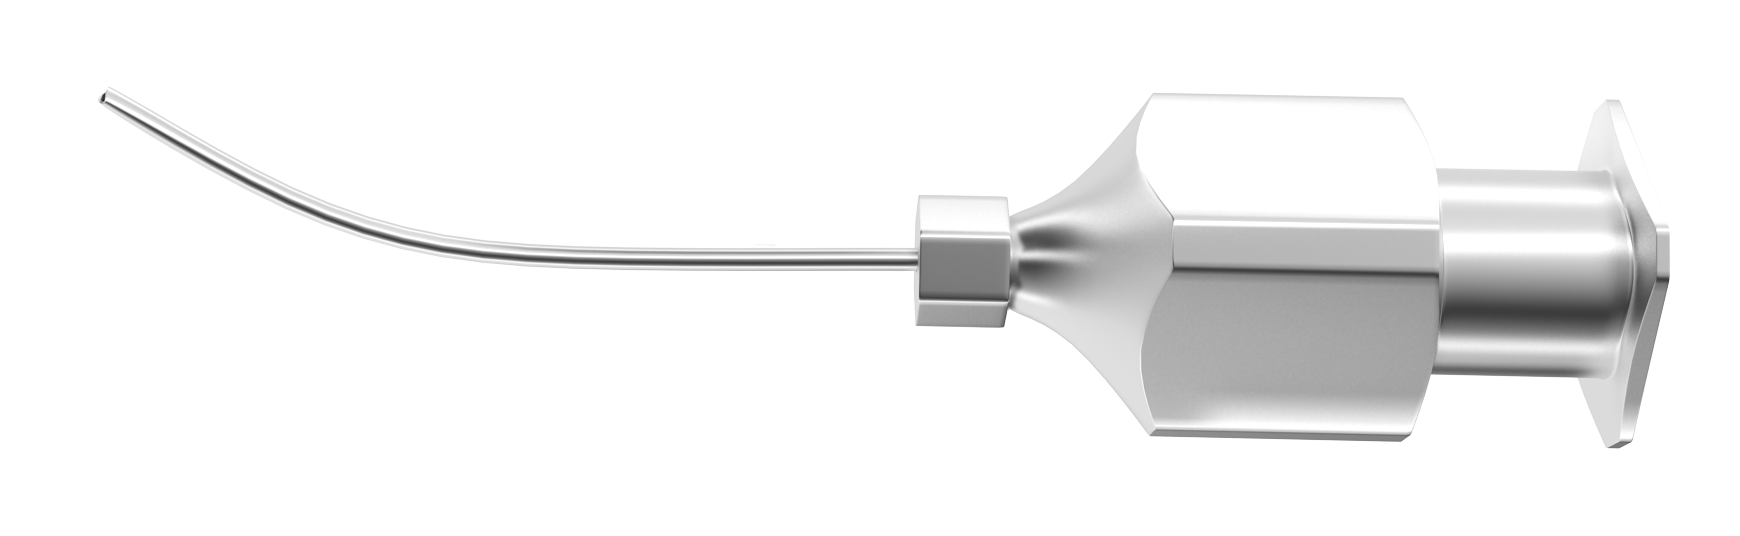 849R 15-013-19 Sub-Tenon's Anesthesia Cannula, Curved, Flattened Tip, 19 Ga x 25 mm, Front Opening